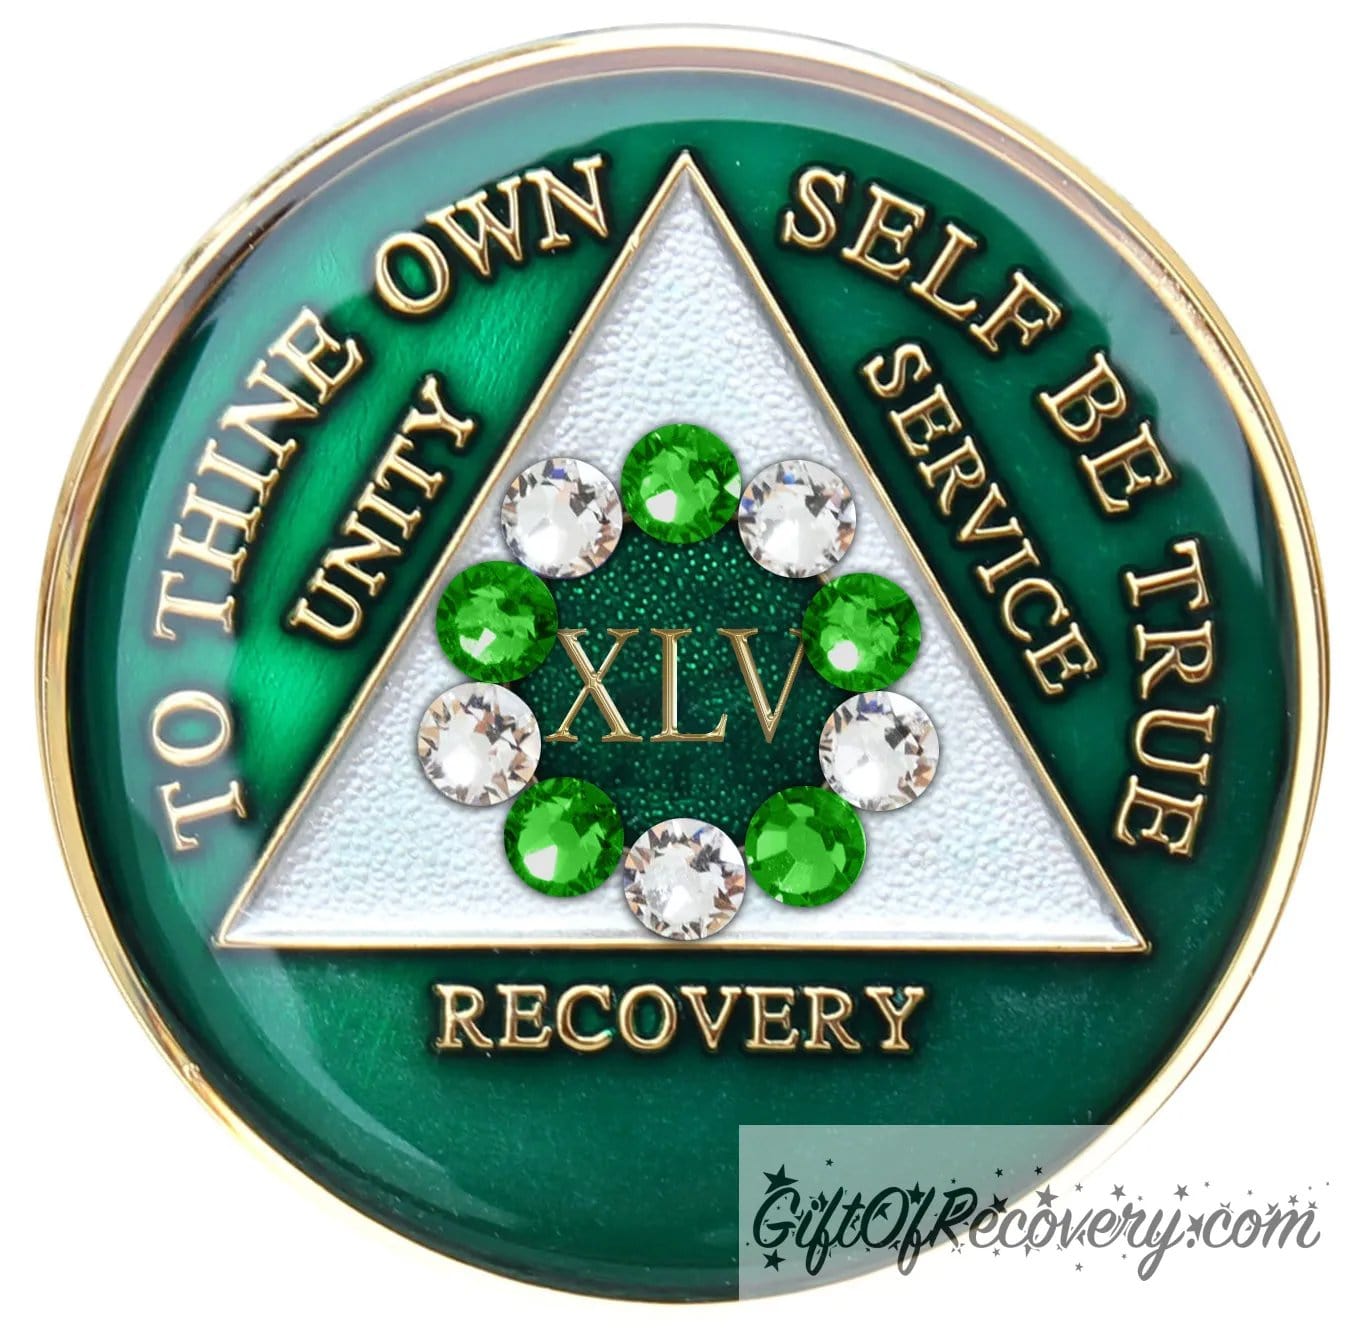 45 year emerald green AA medallion with the 10th step in emphasis in the center, 5 emerald green genuine crystals and 5 clear genuine crystals, inside the triangle is pearl white, while the circle is sparkle green. To thine own self be true, unity, service, recovery, and the roman numeral 1, are 14k gold and sealed with resin for a glossy finish.